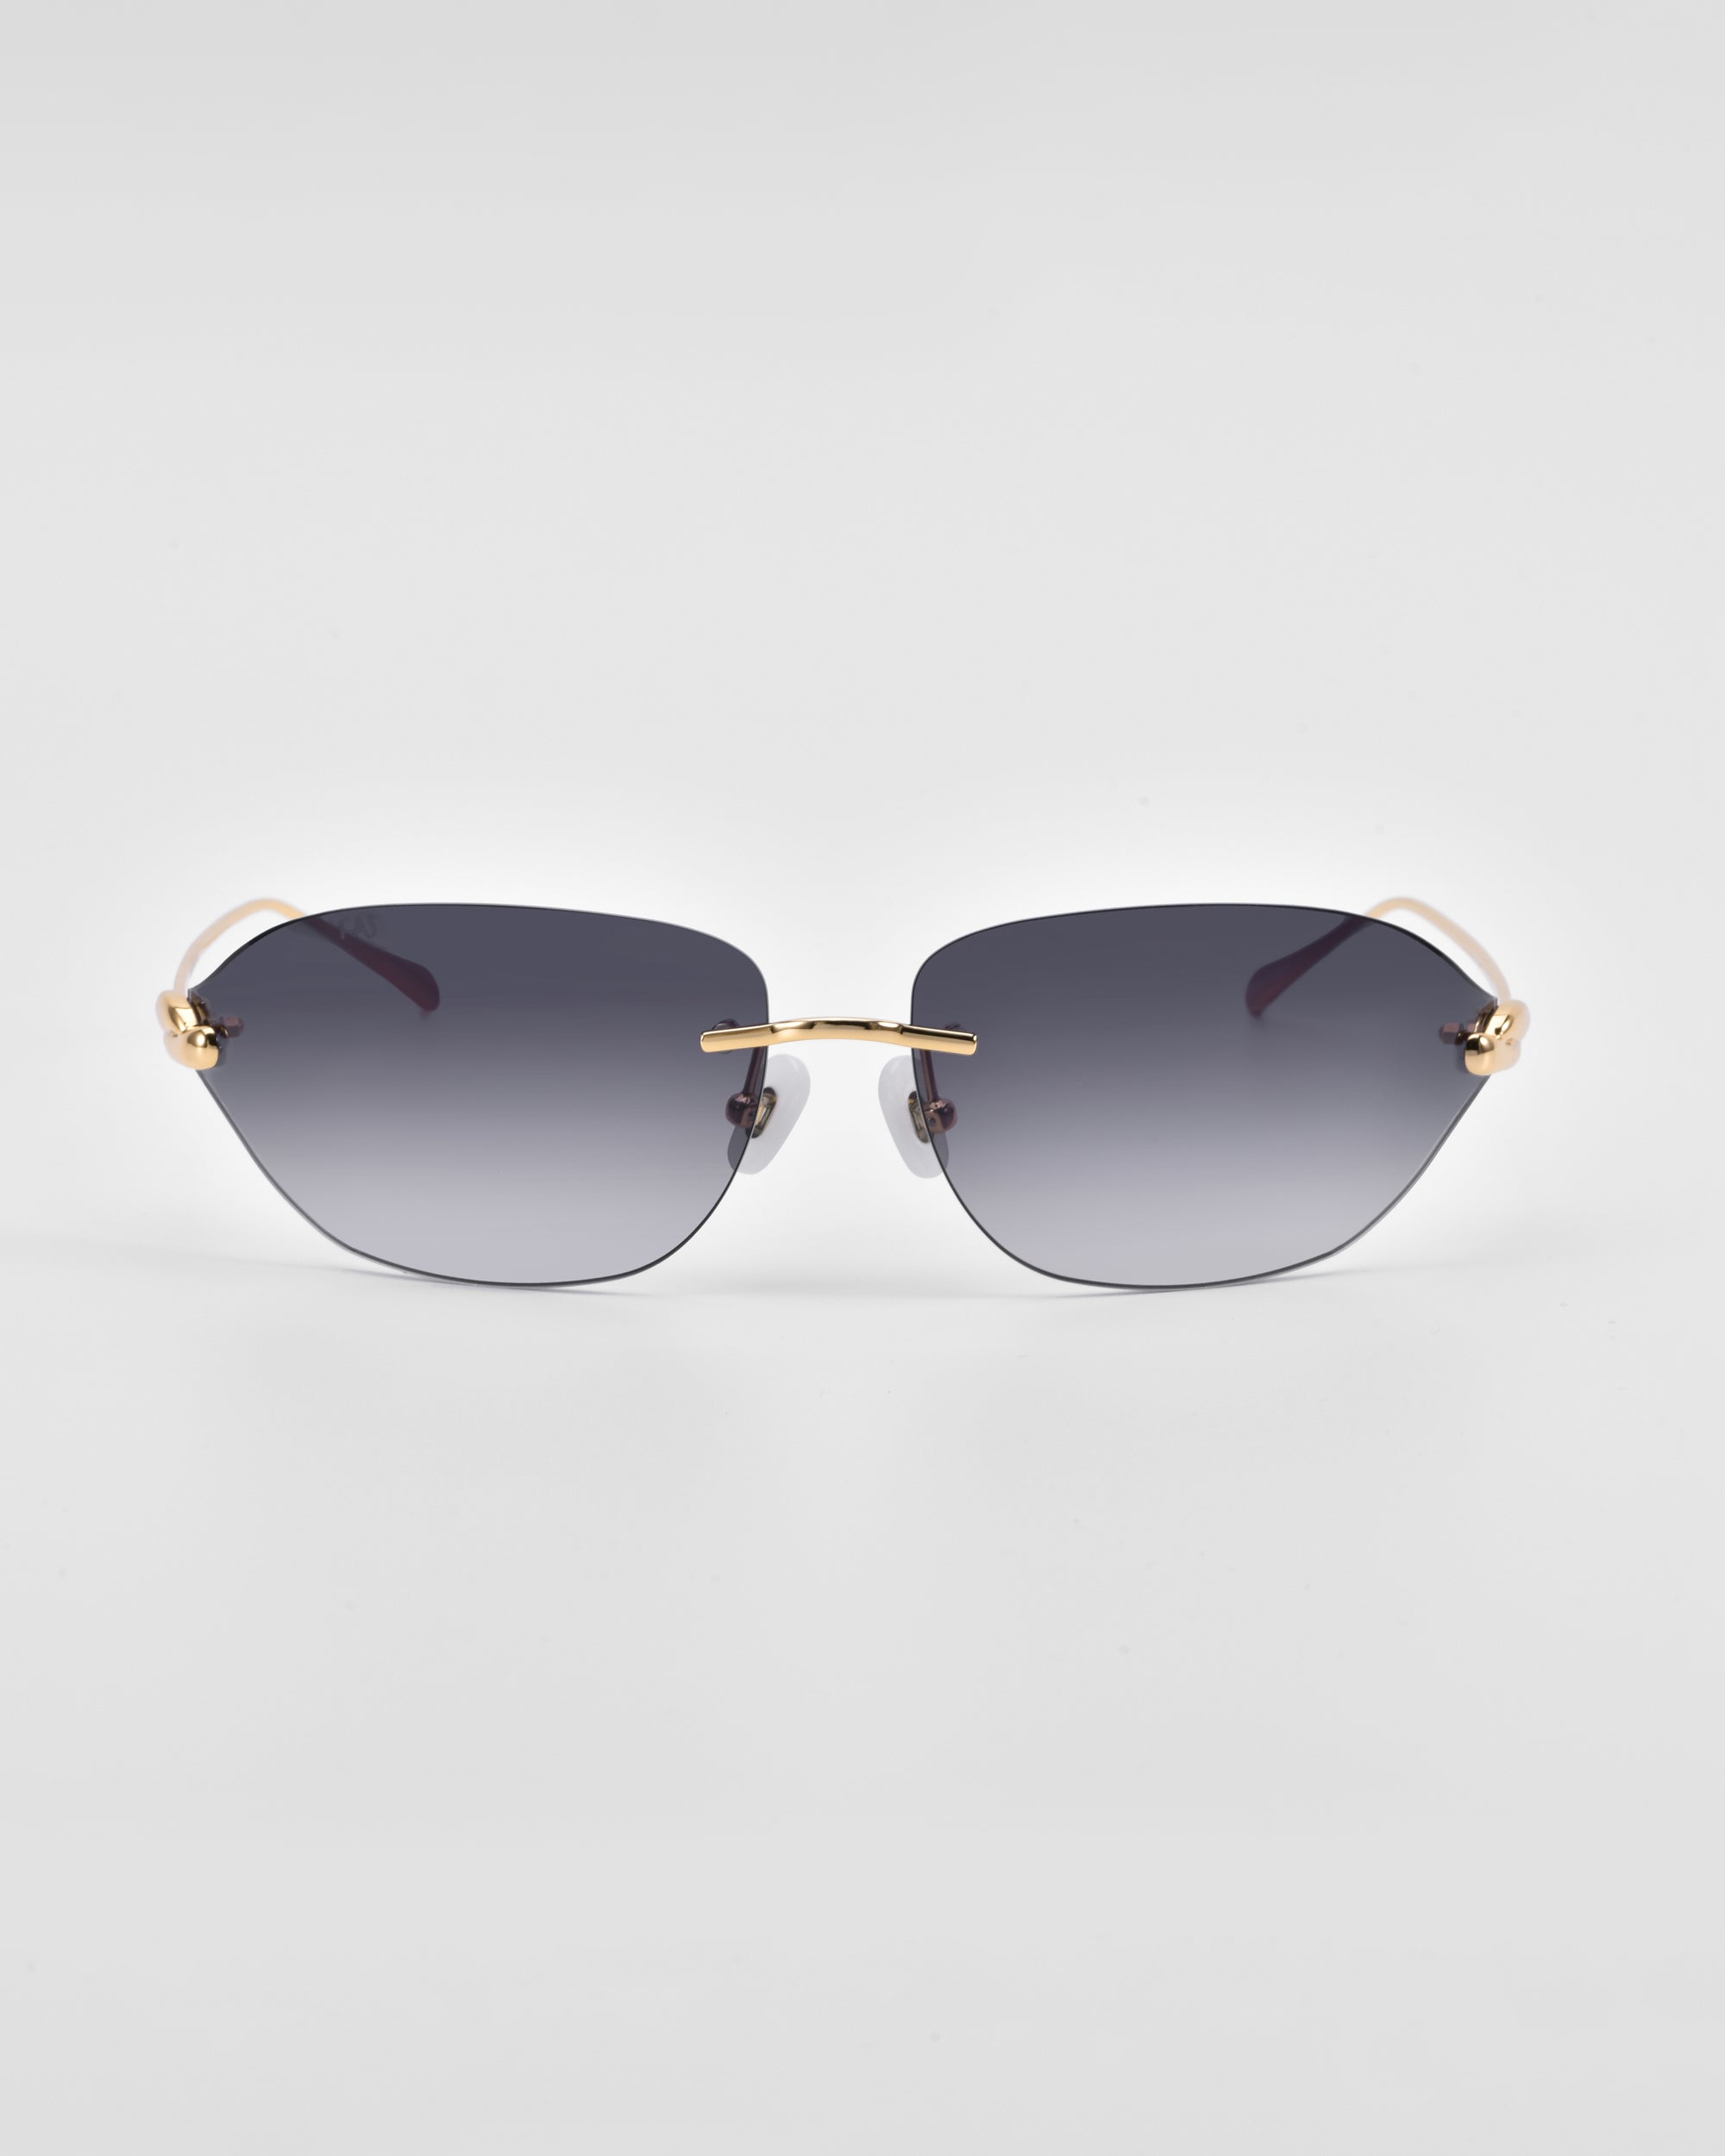 A pair of Serpent I sunglasses with dark gradient lenses and sleek, thin gold frames featuring 18-karat gold plating from For Art&#39;s Sake®. The minimalist design includes a bar across the nose bridge, natural jade-stone nose pads, and curved temples. The background is a clean, plain light grey.